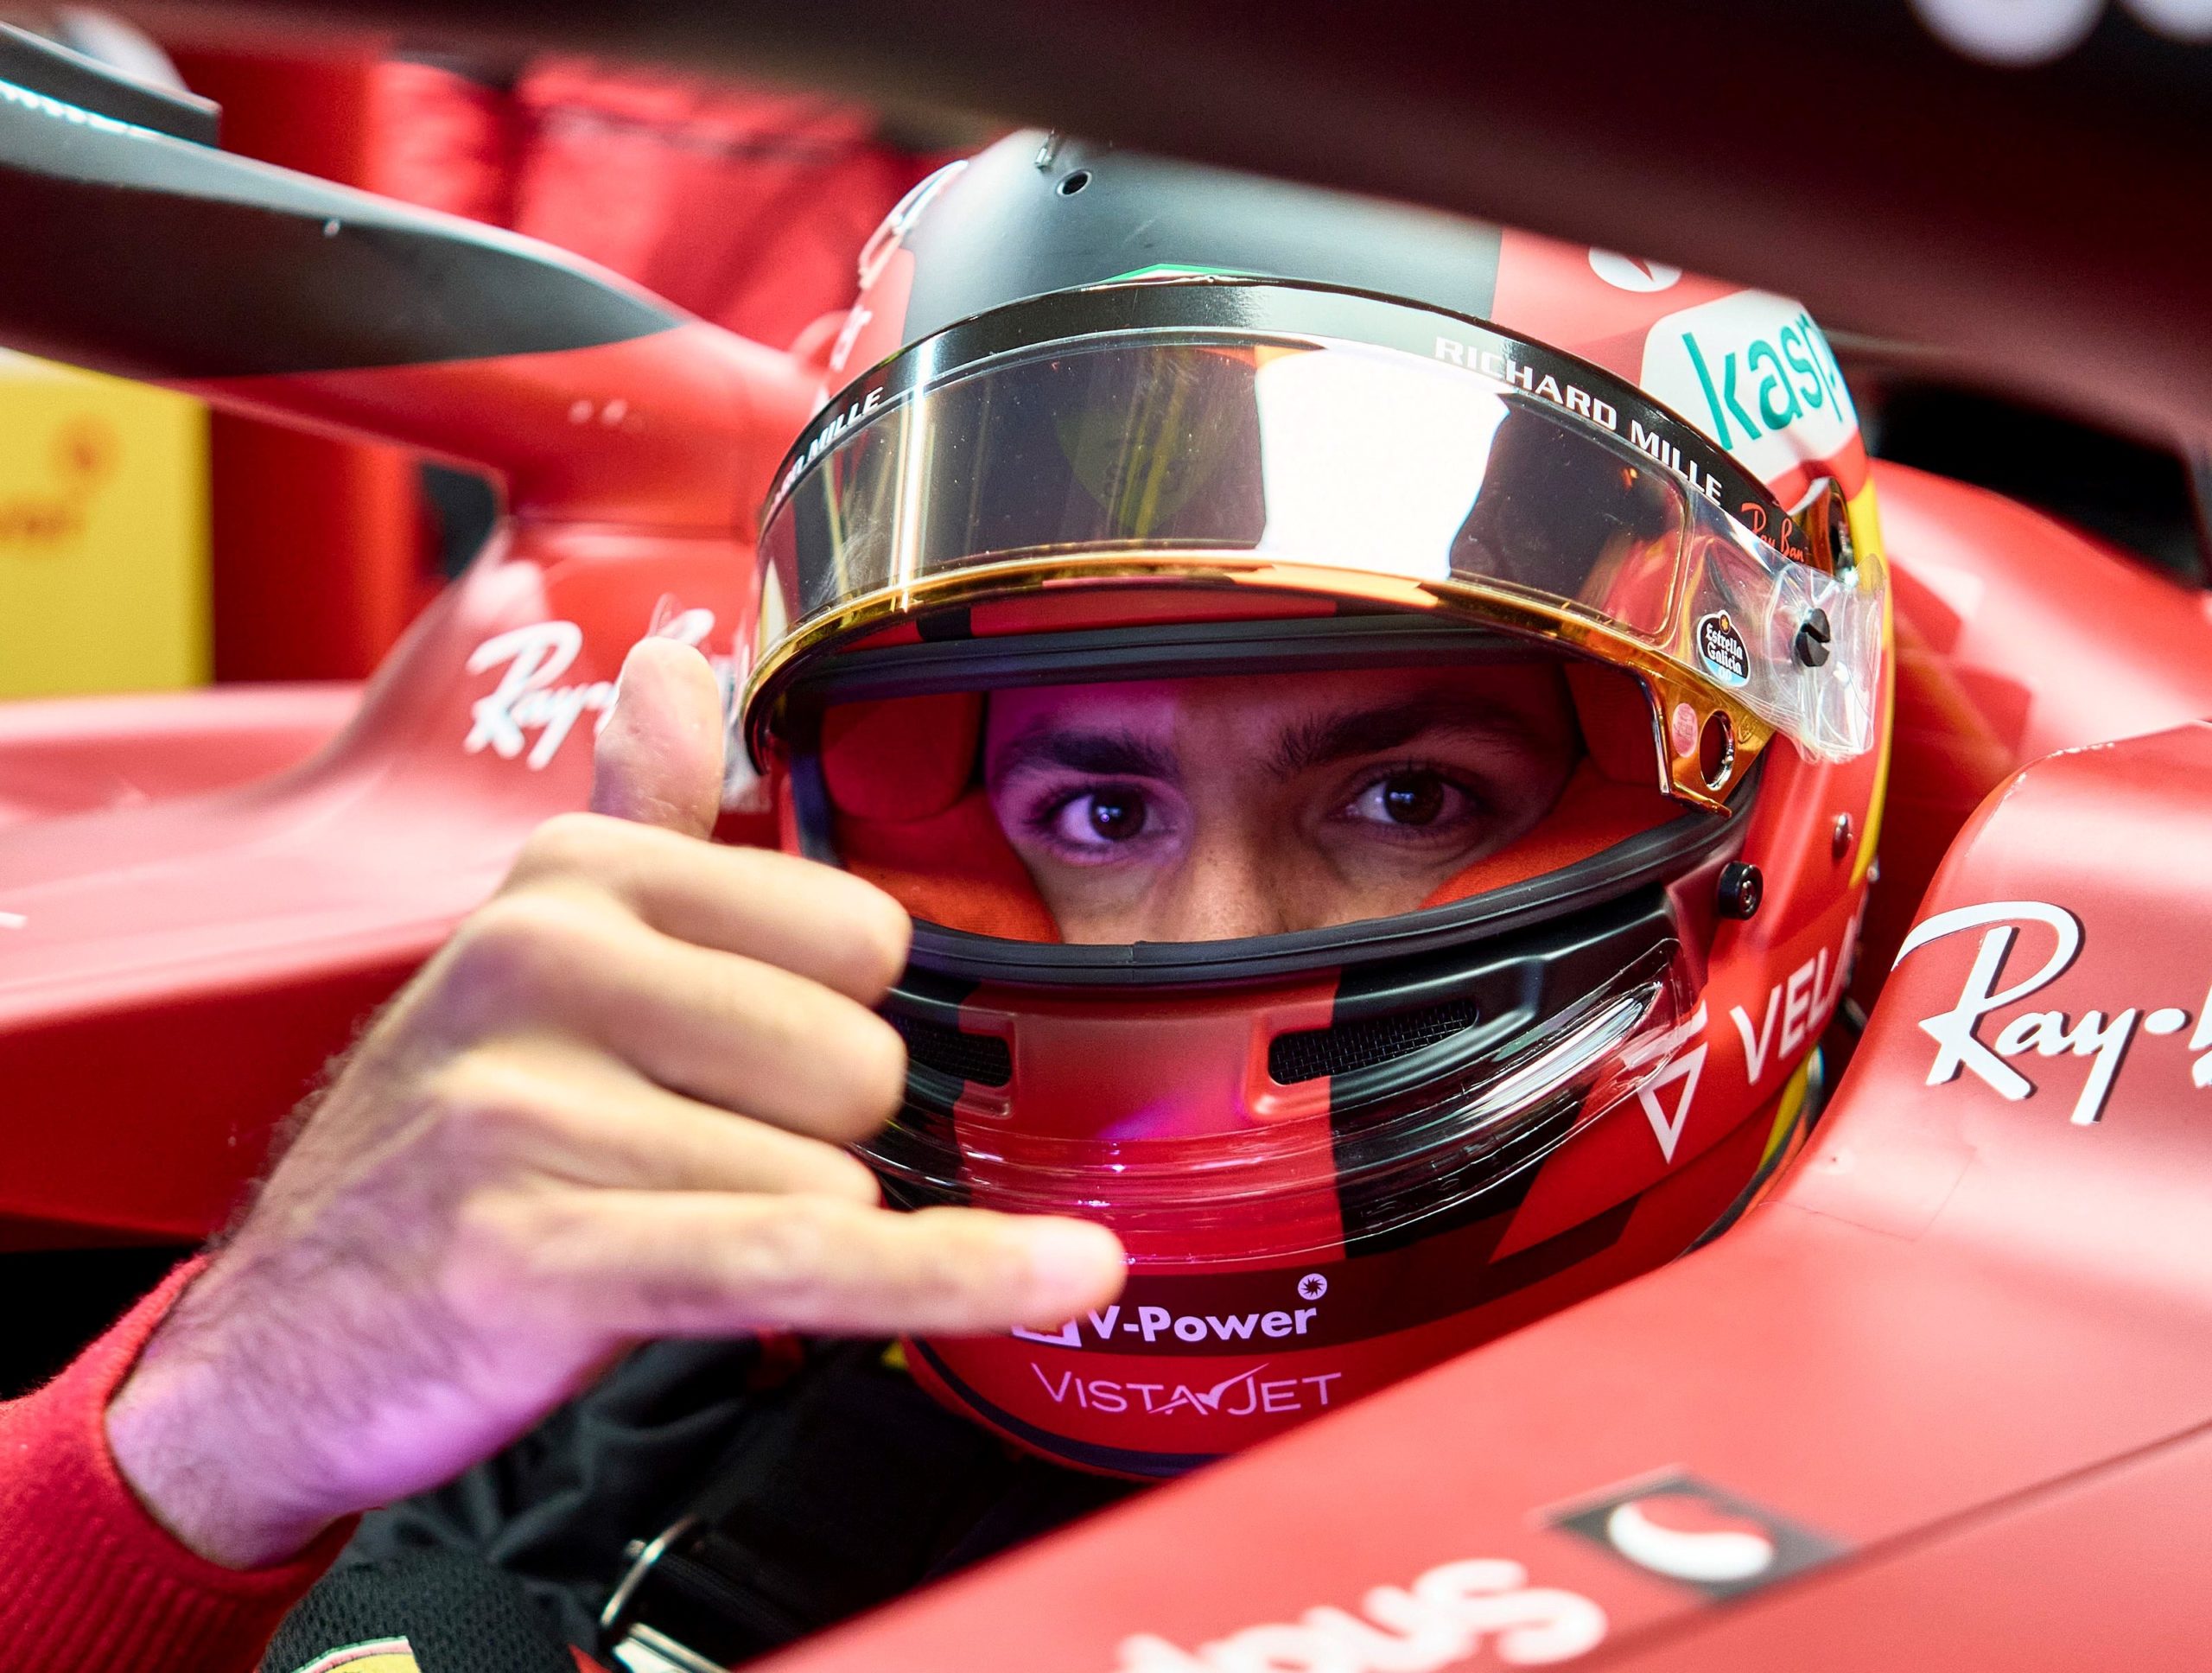 Carlos Sainz takes the new Ferrari F1-75 out for a ride in Barcelona